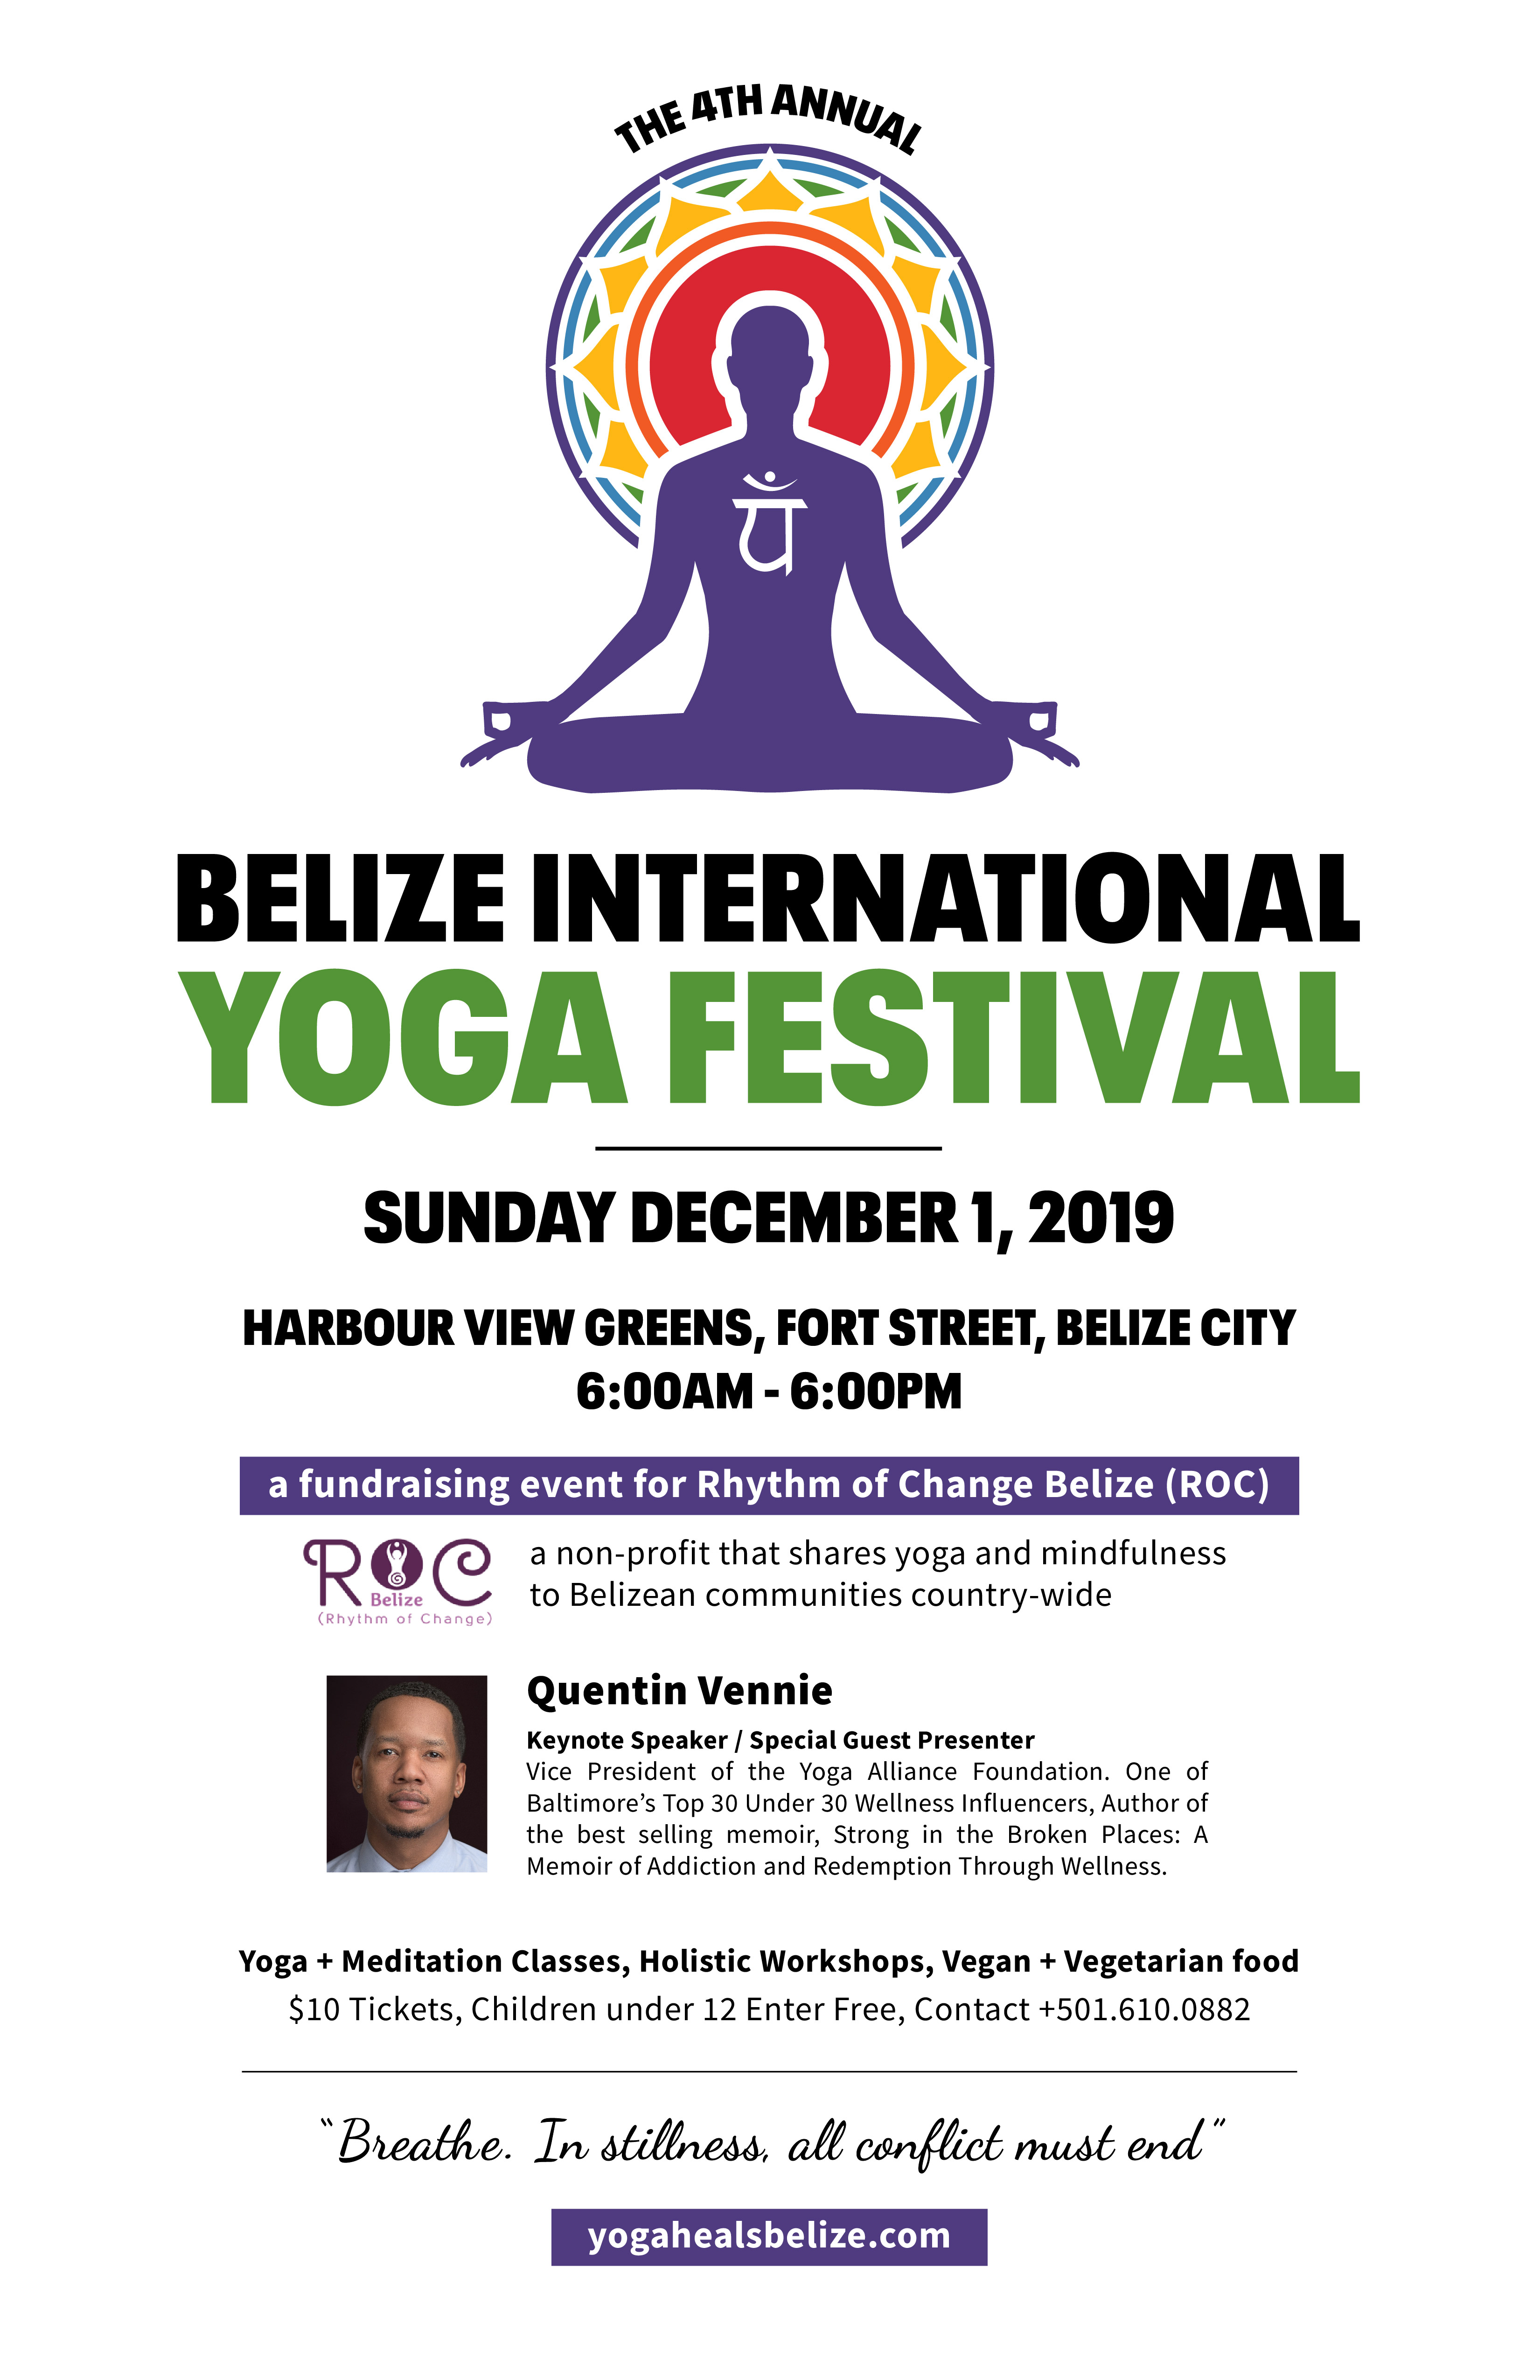 belize-international-yoga-festival-poster-with-quentin-vennie